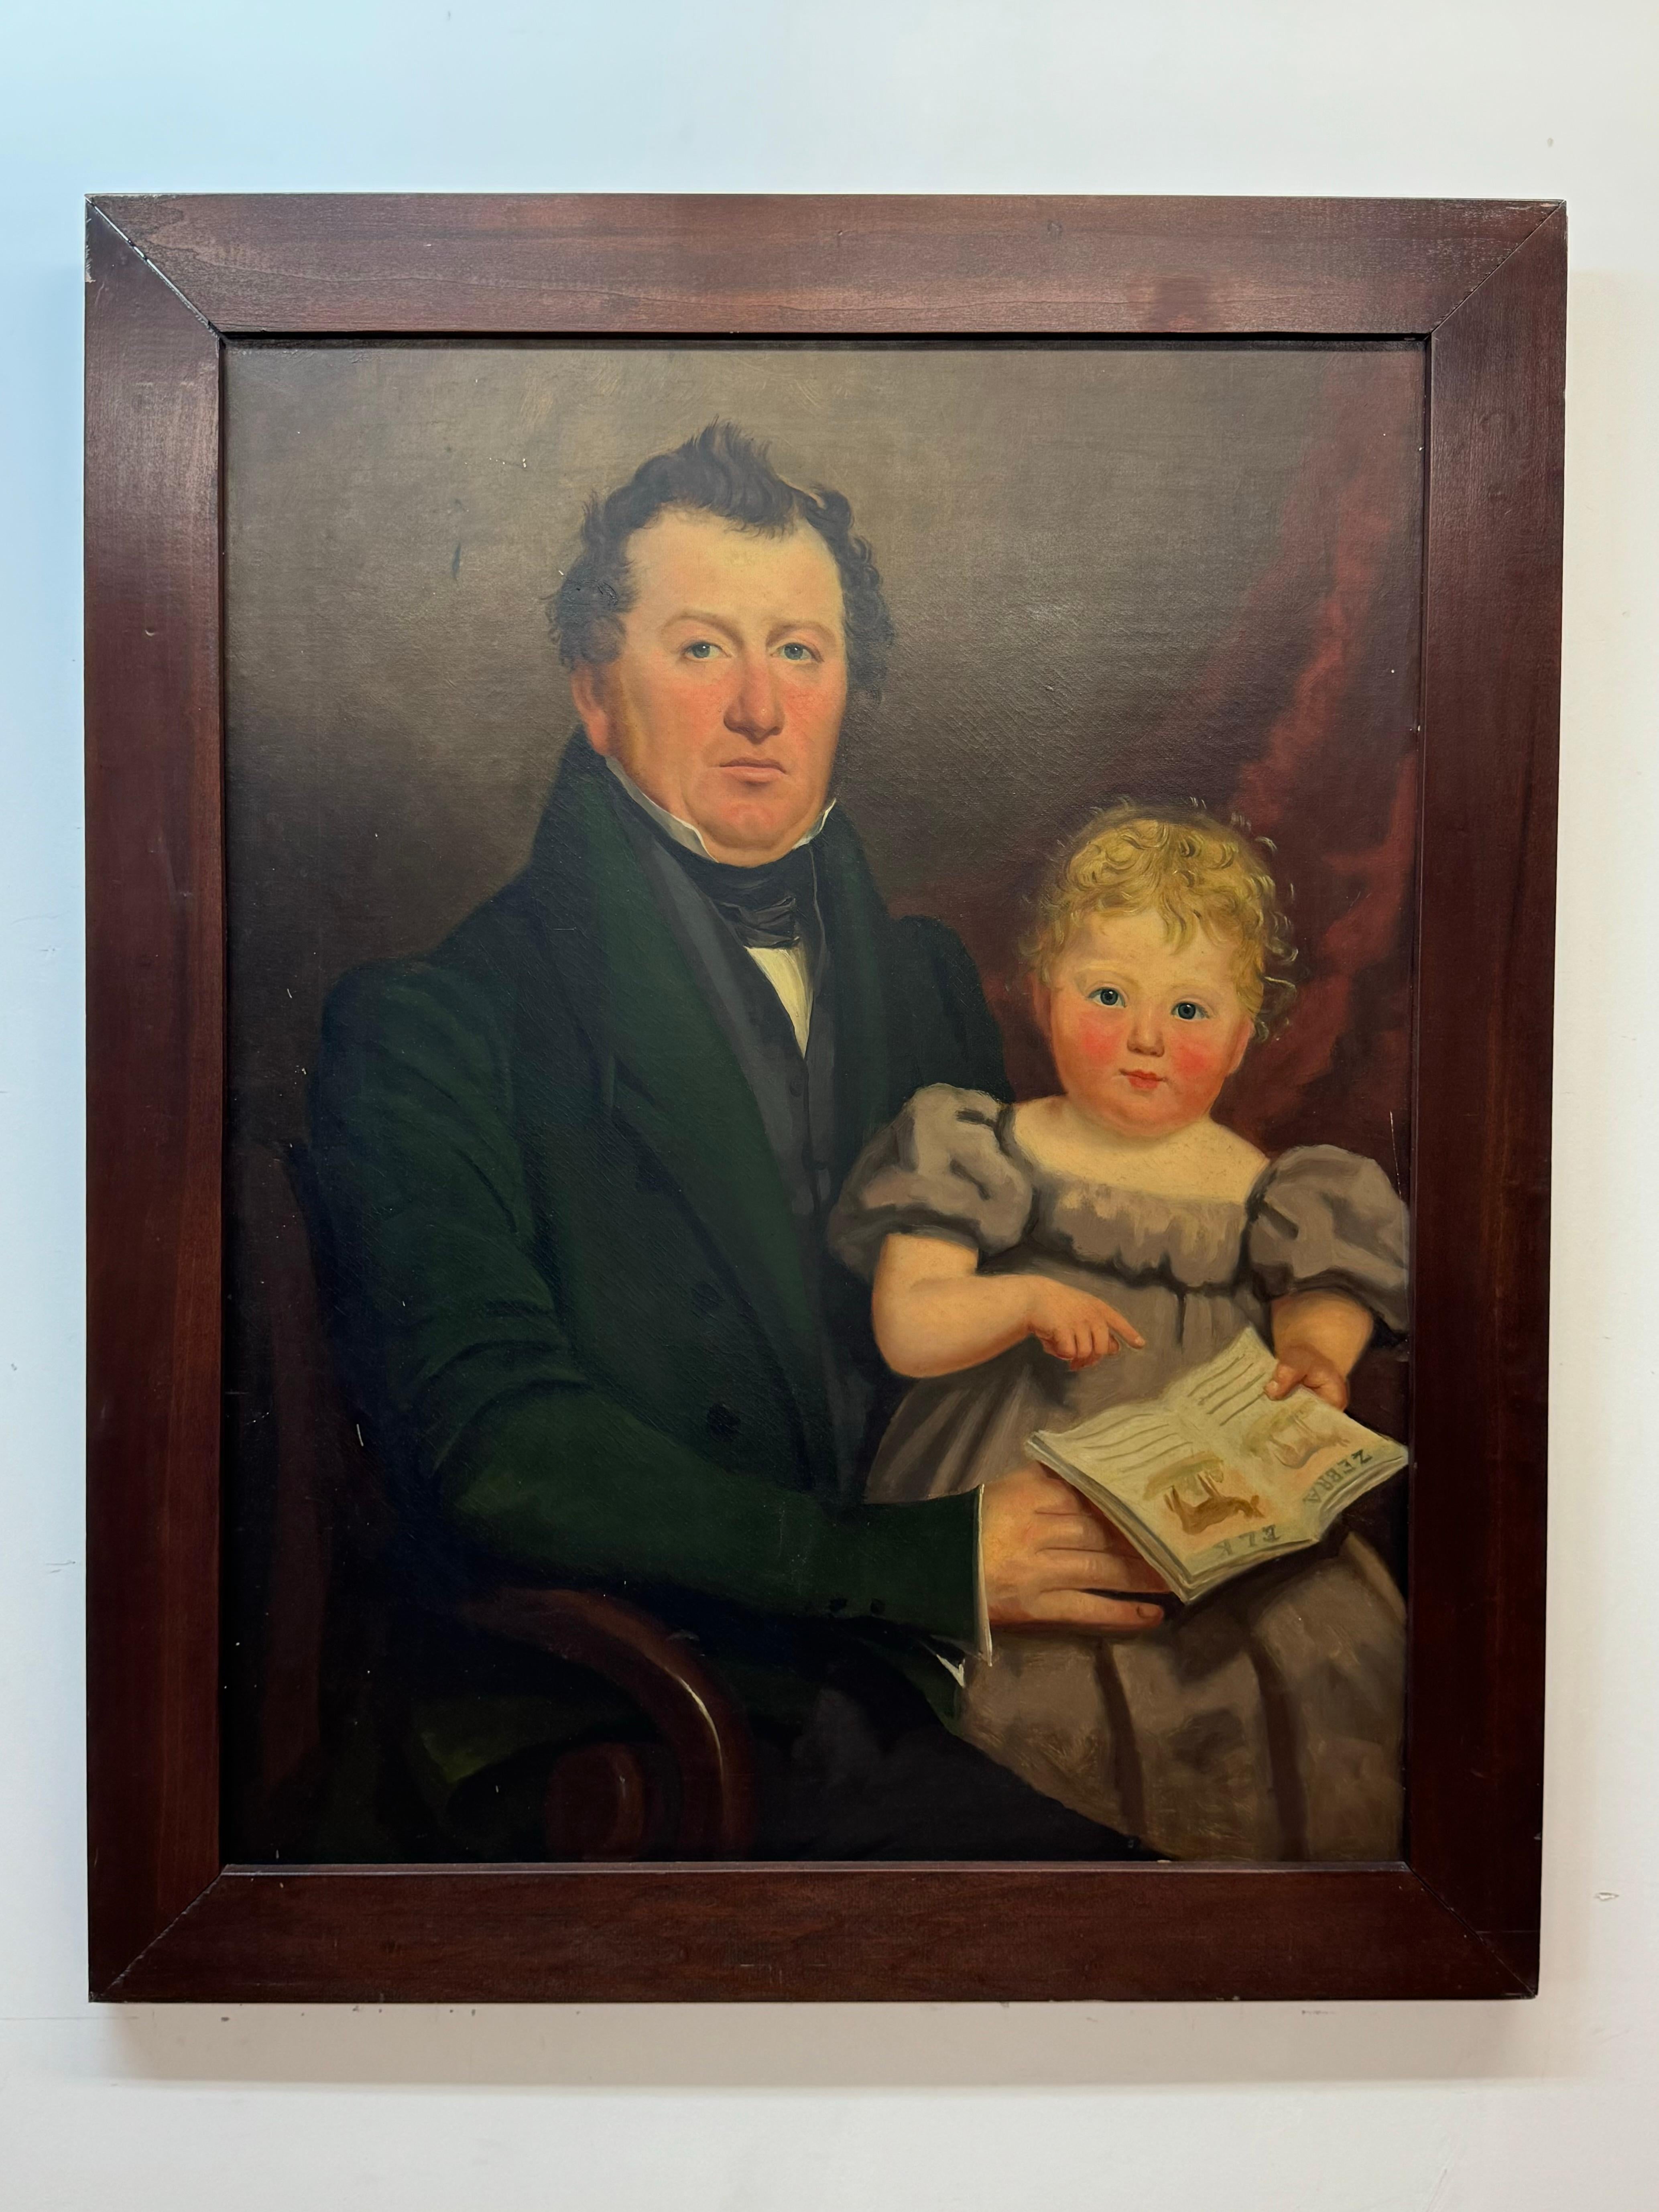 Unknown Portrait Painting - 19th century portrait, painting of father and daughter